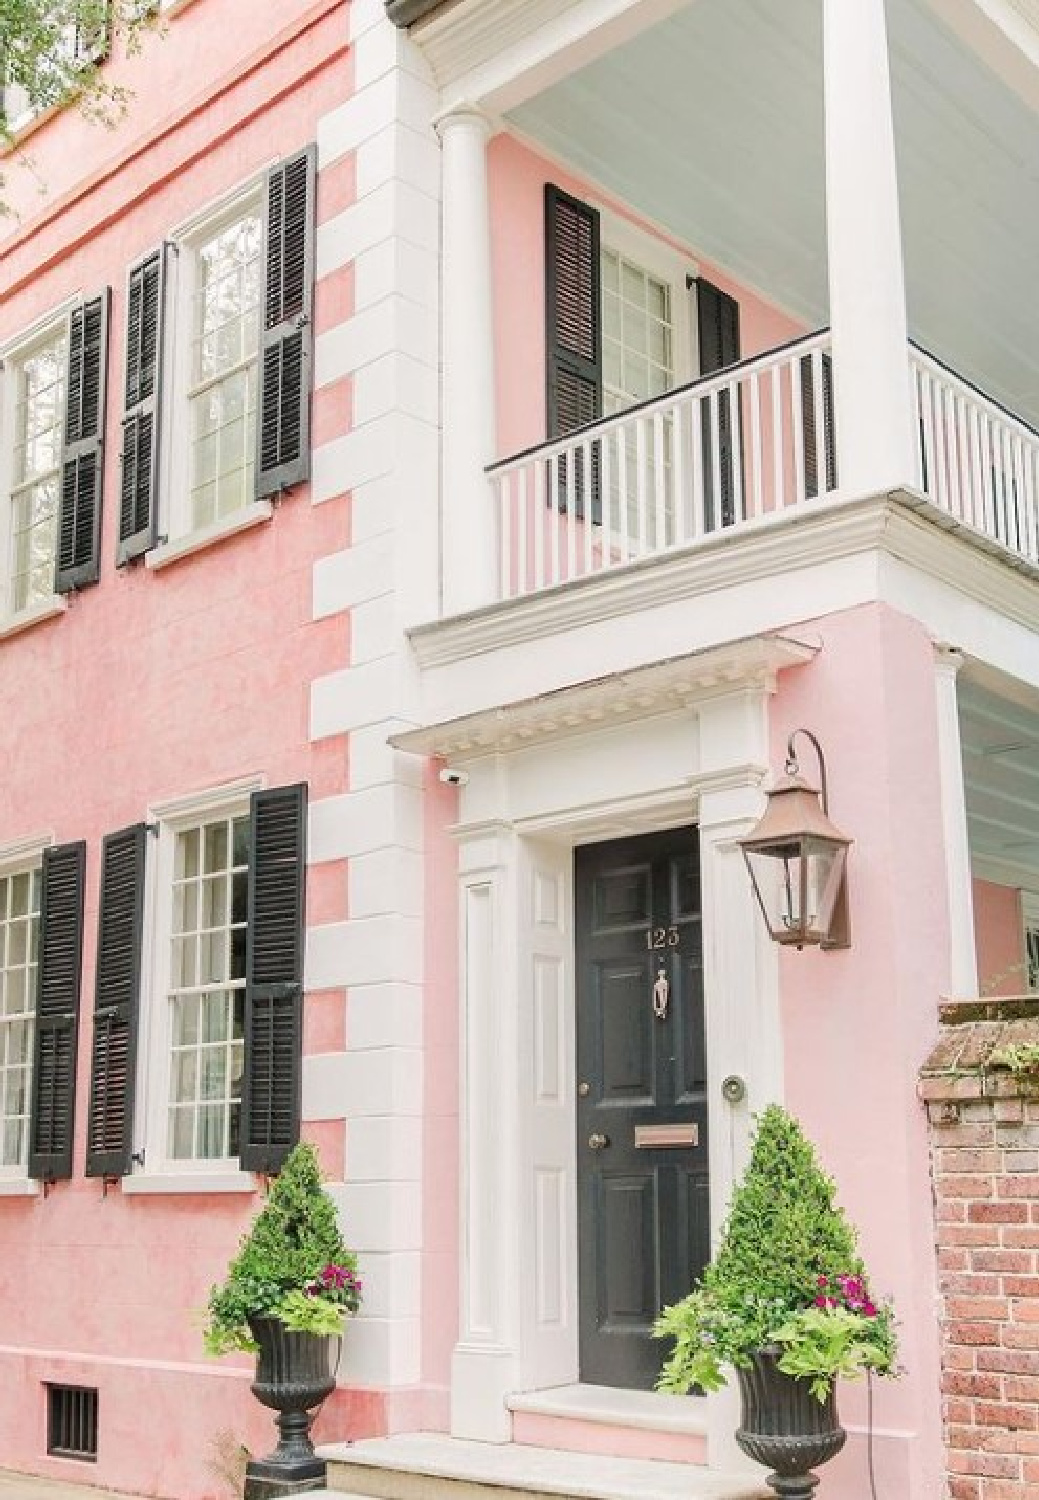 Pink Charleston house exterior with black shutters and front door, topiaries, and gas lanterns - @palmbeachlately (photo by SarahLainePhoto). #pinkhouses #charlestonhouses #pinkpaintcolors